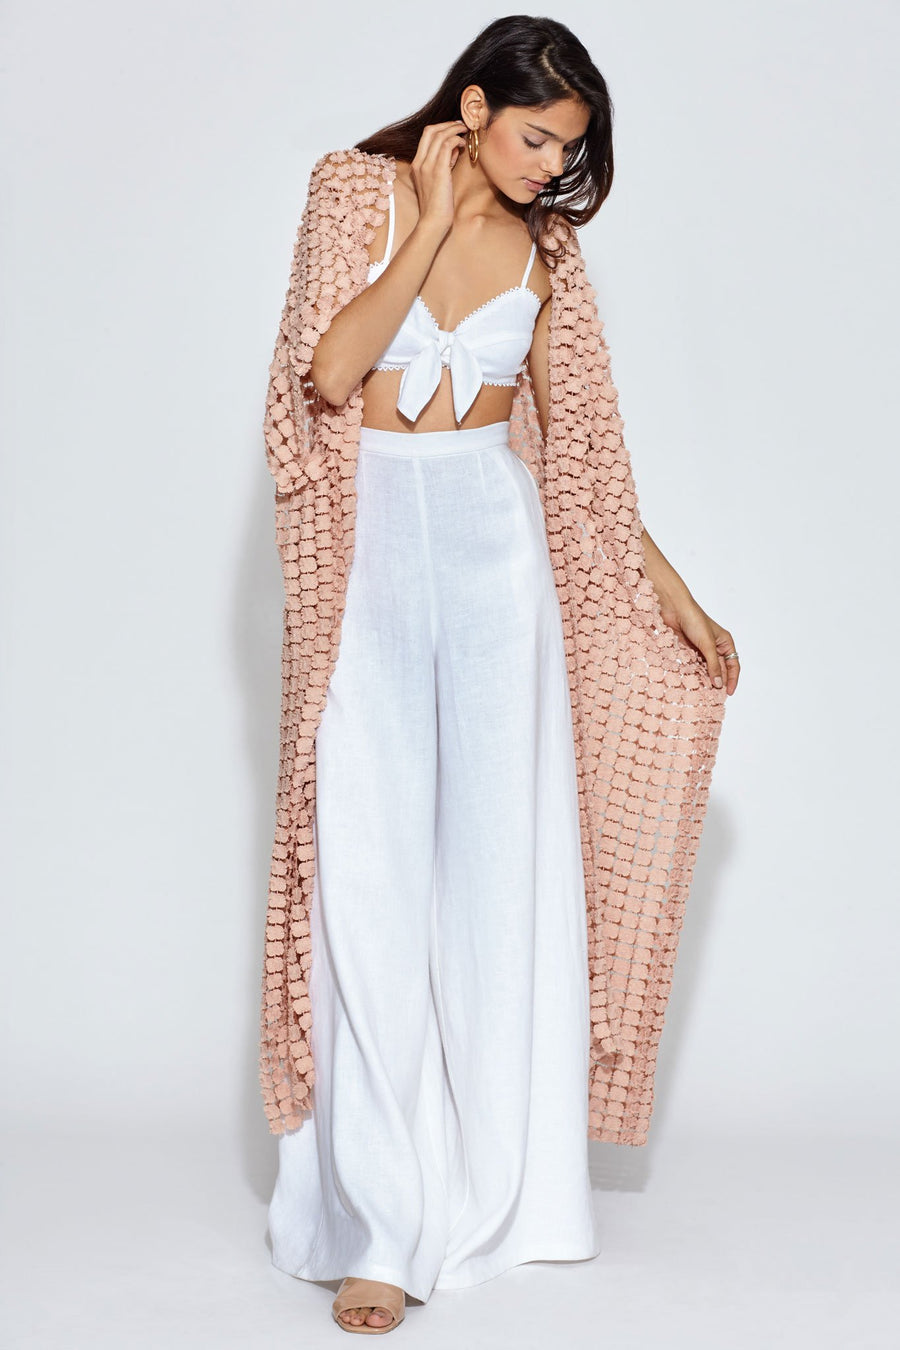 This is a photo of a woman wearing a white linen bralette with white linen wide leg pants. On top of the bralette and pants, she is wearing a dusty pink, dandelion lace cover-up.